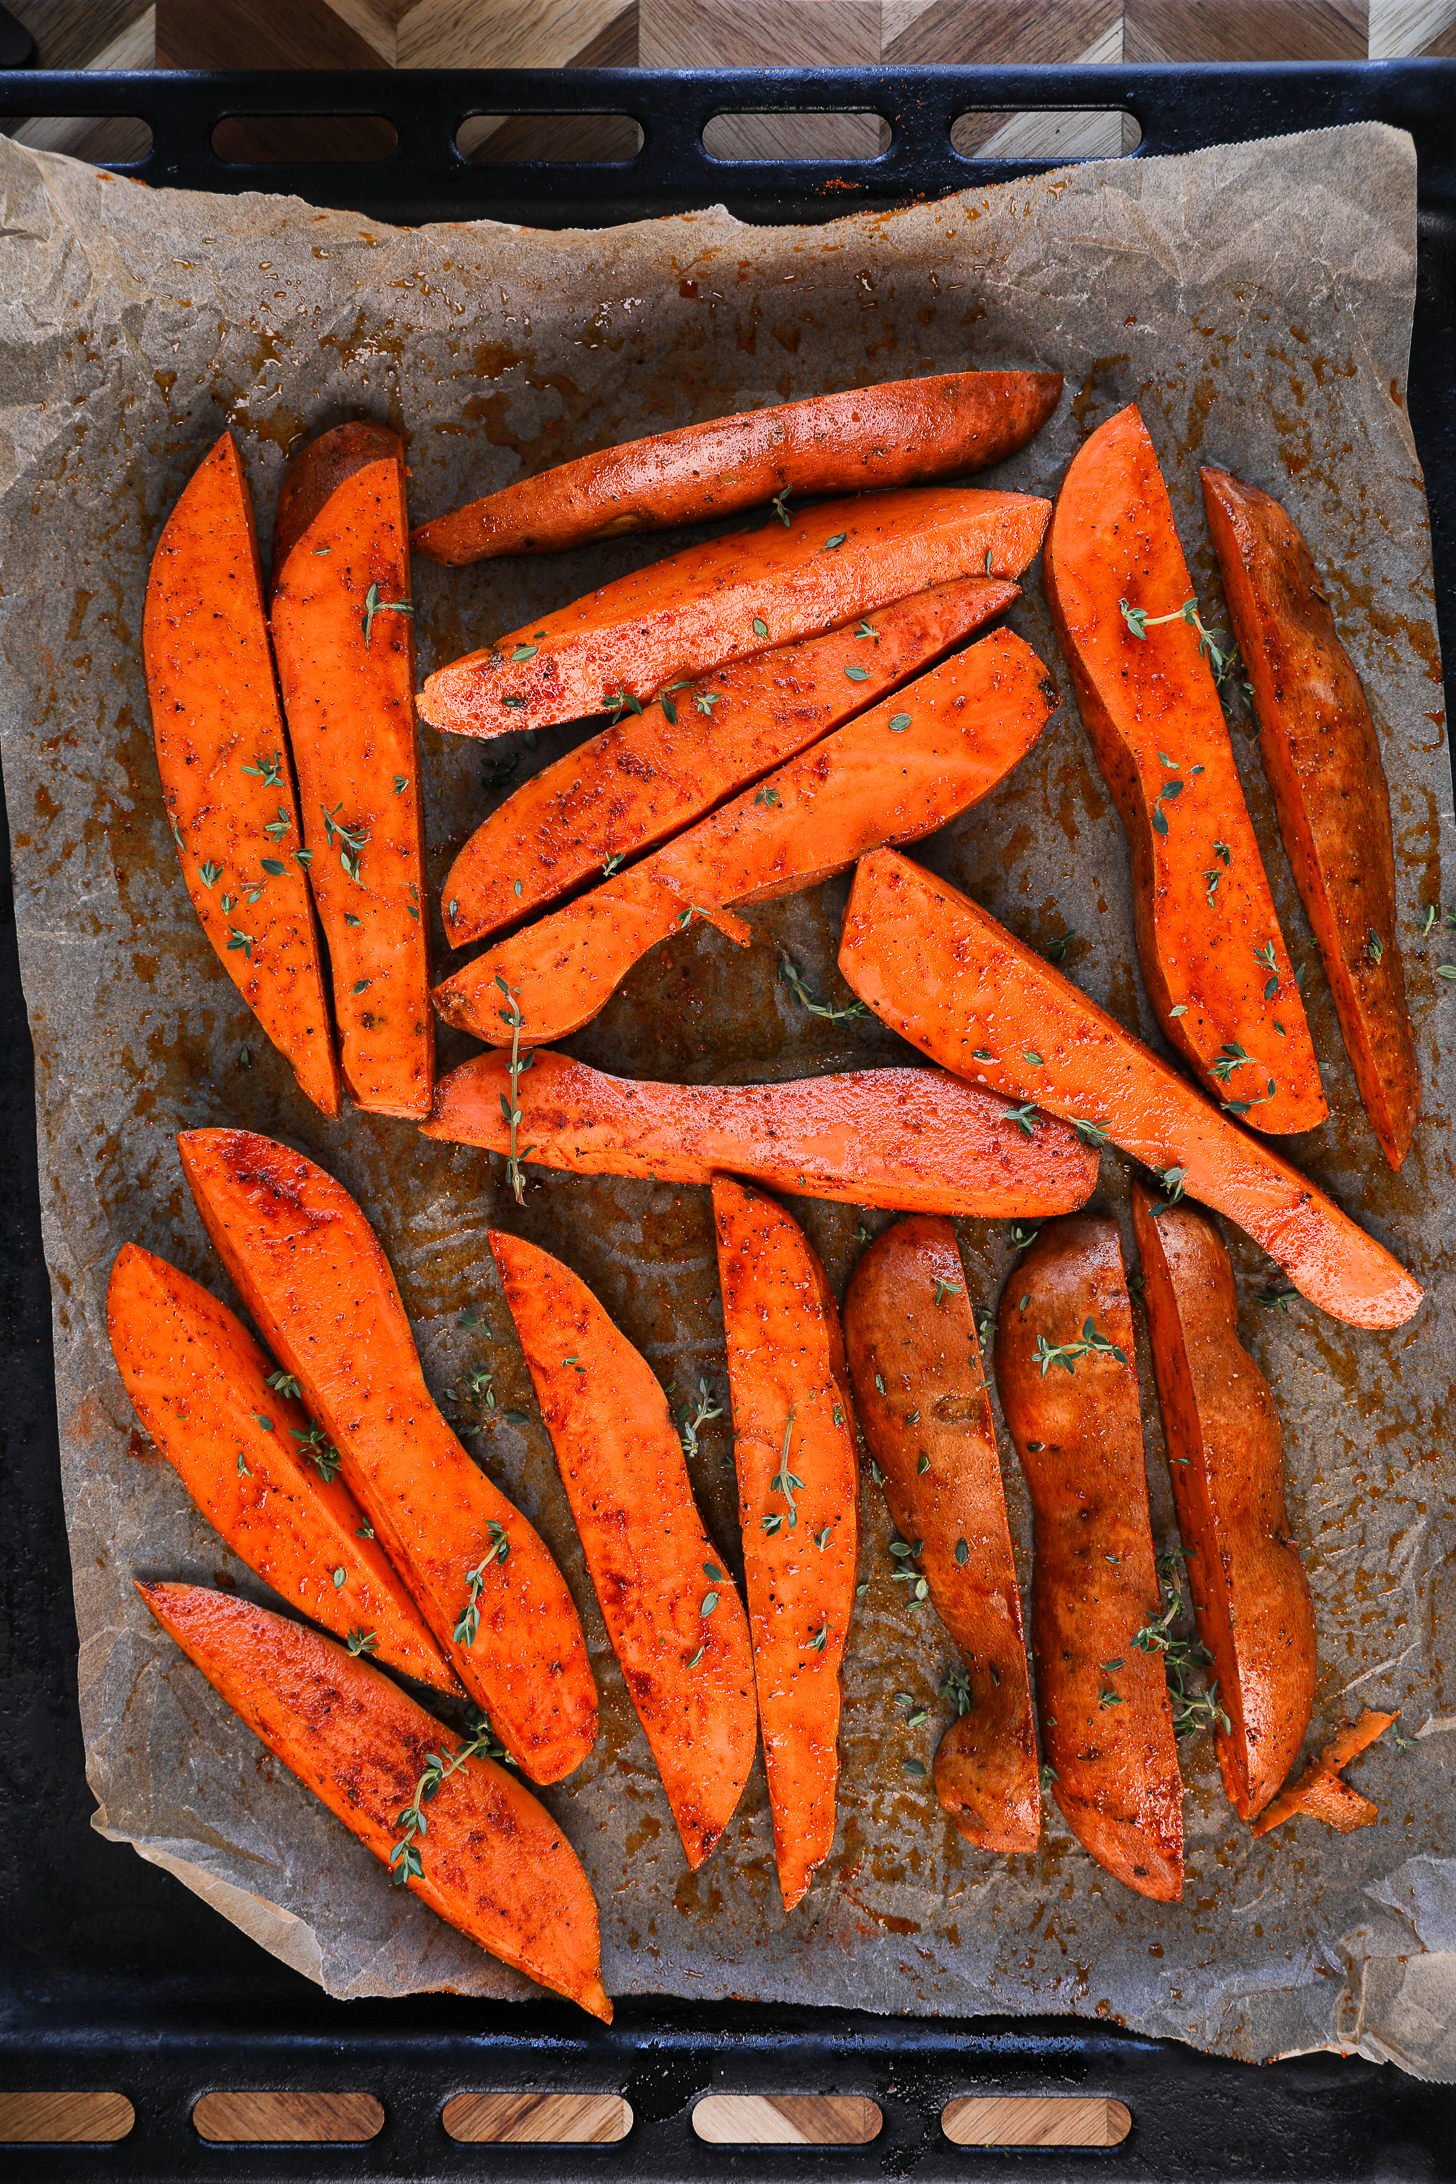 Uncooked sweet potato wedges coated in oil and spices topped with fresh thymes leaves on a lined baking tray.